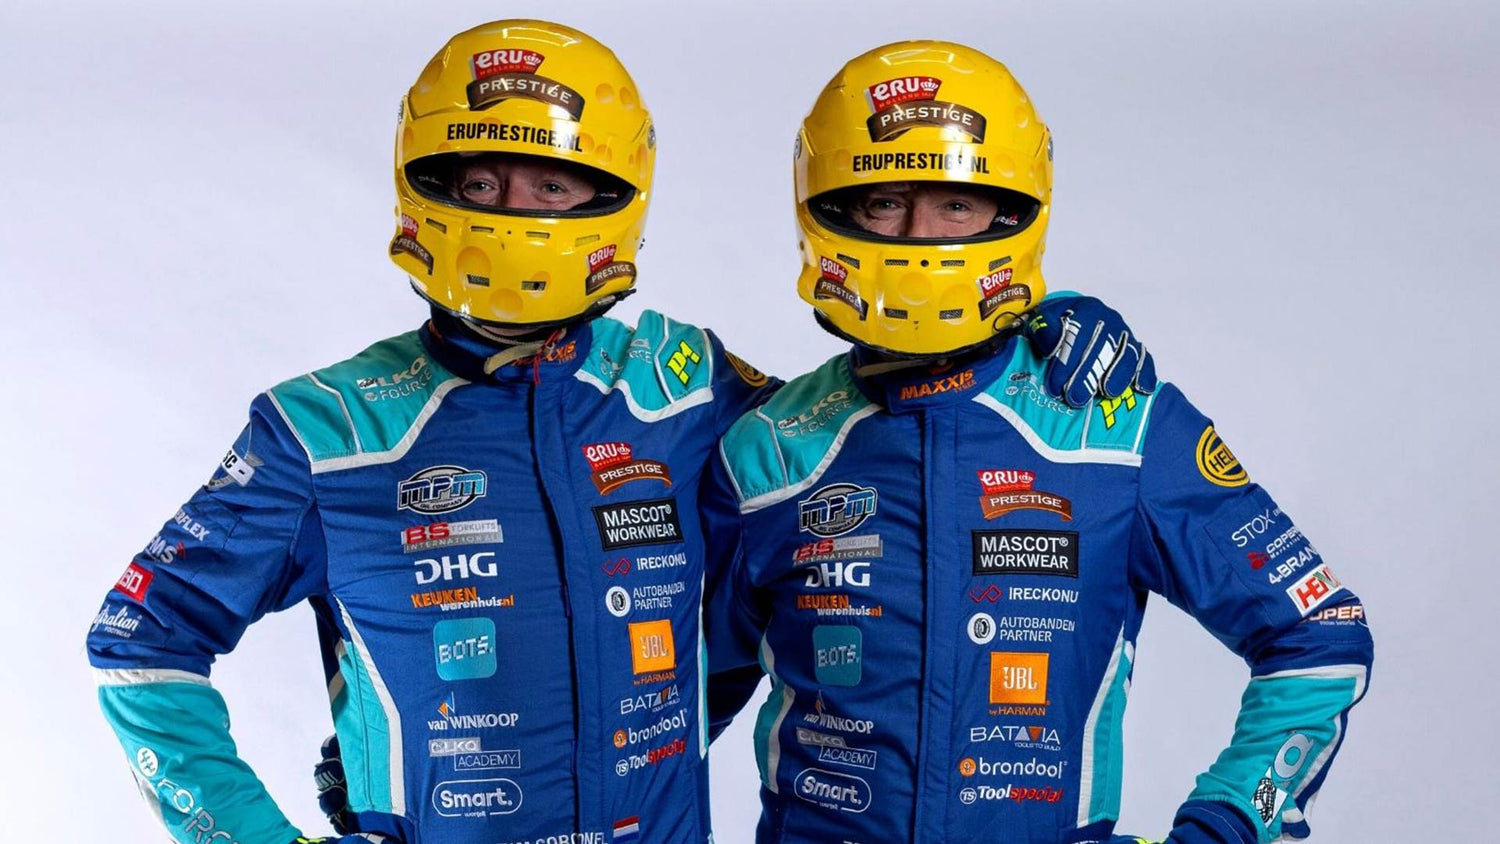 Tim and Tom Coronel posed close together with racing helmets.